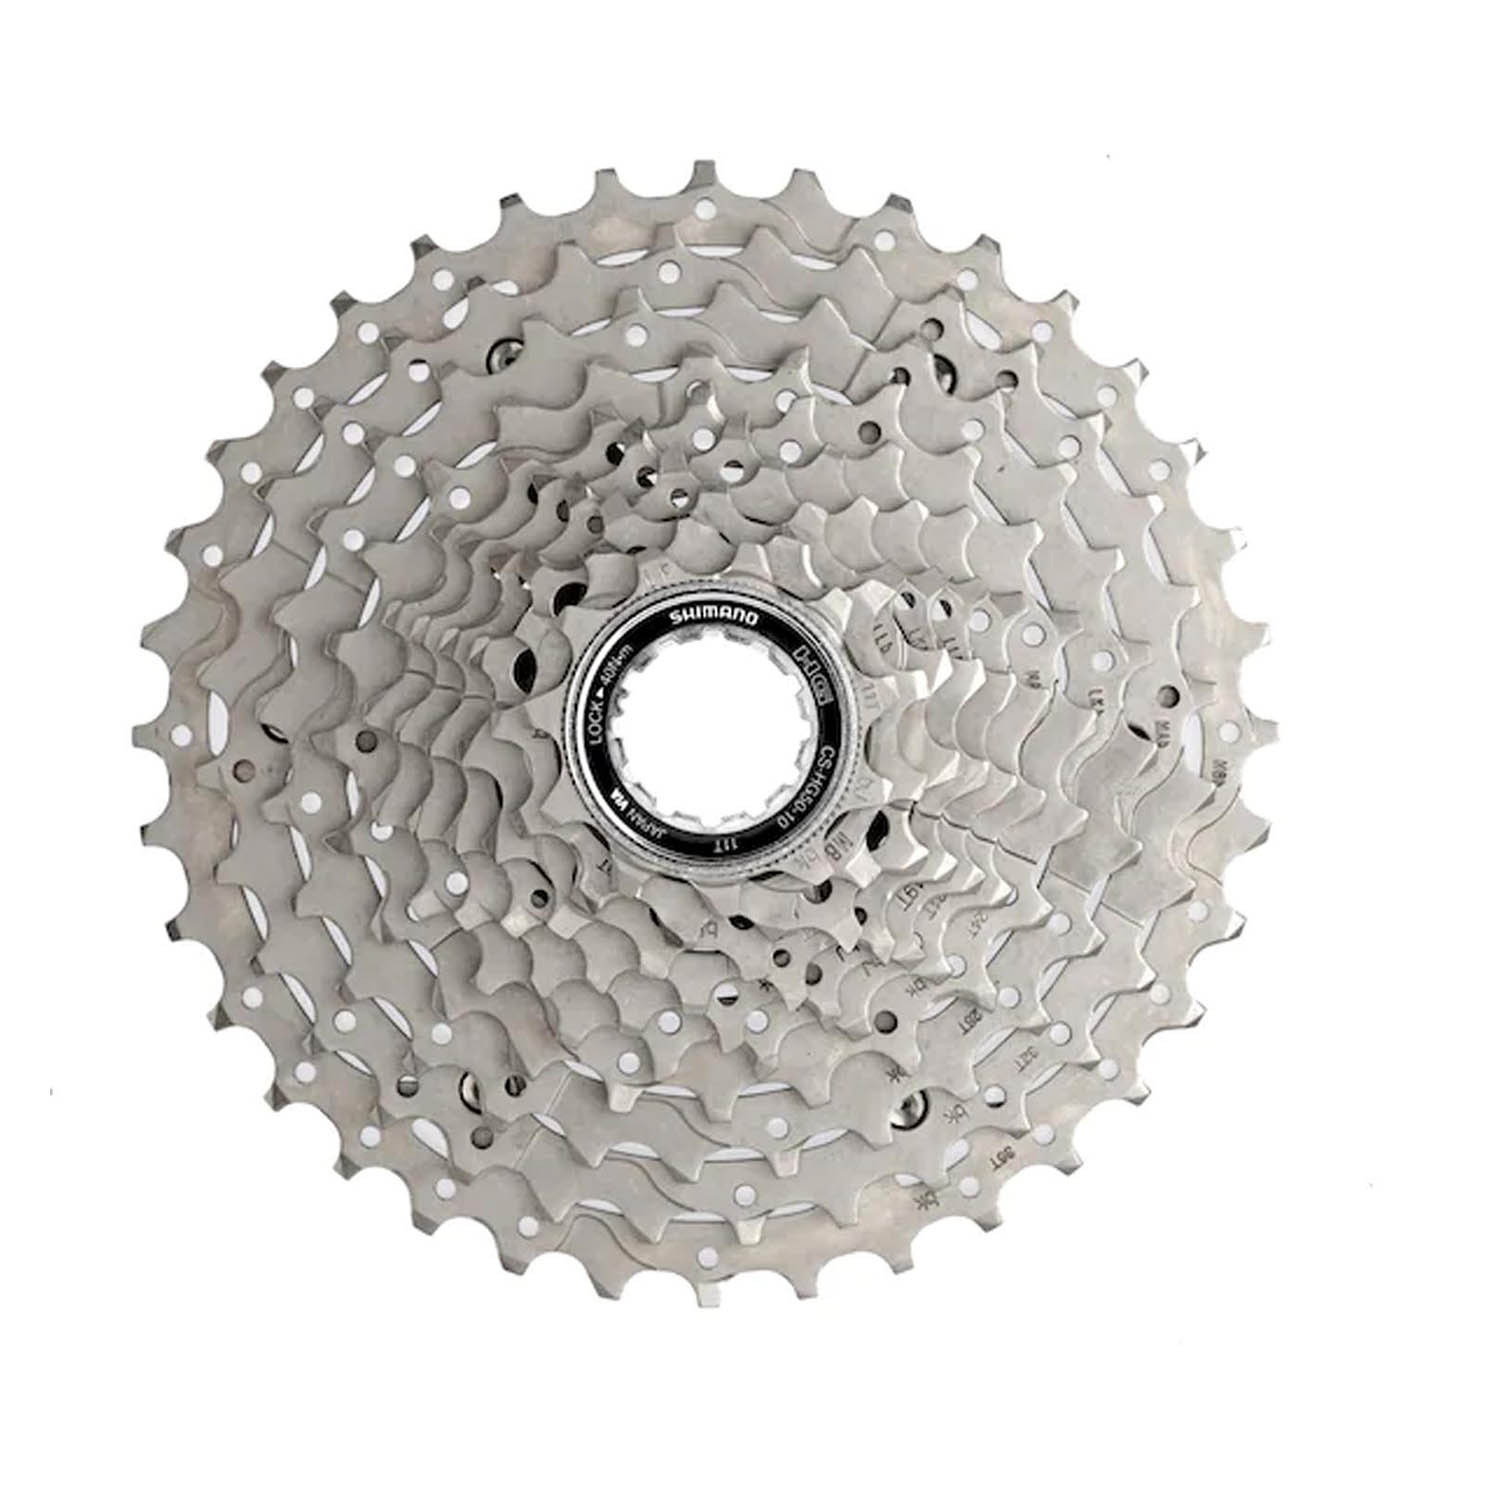 Shimano Deore HG500 10-speed cassette